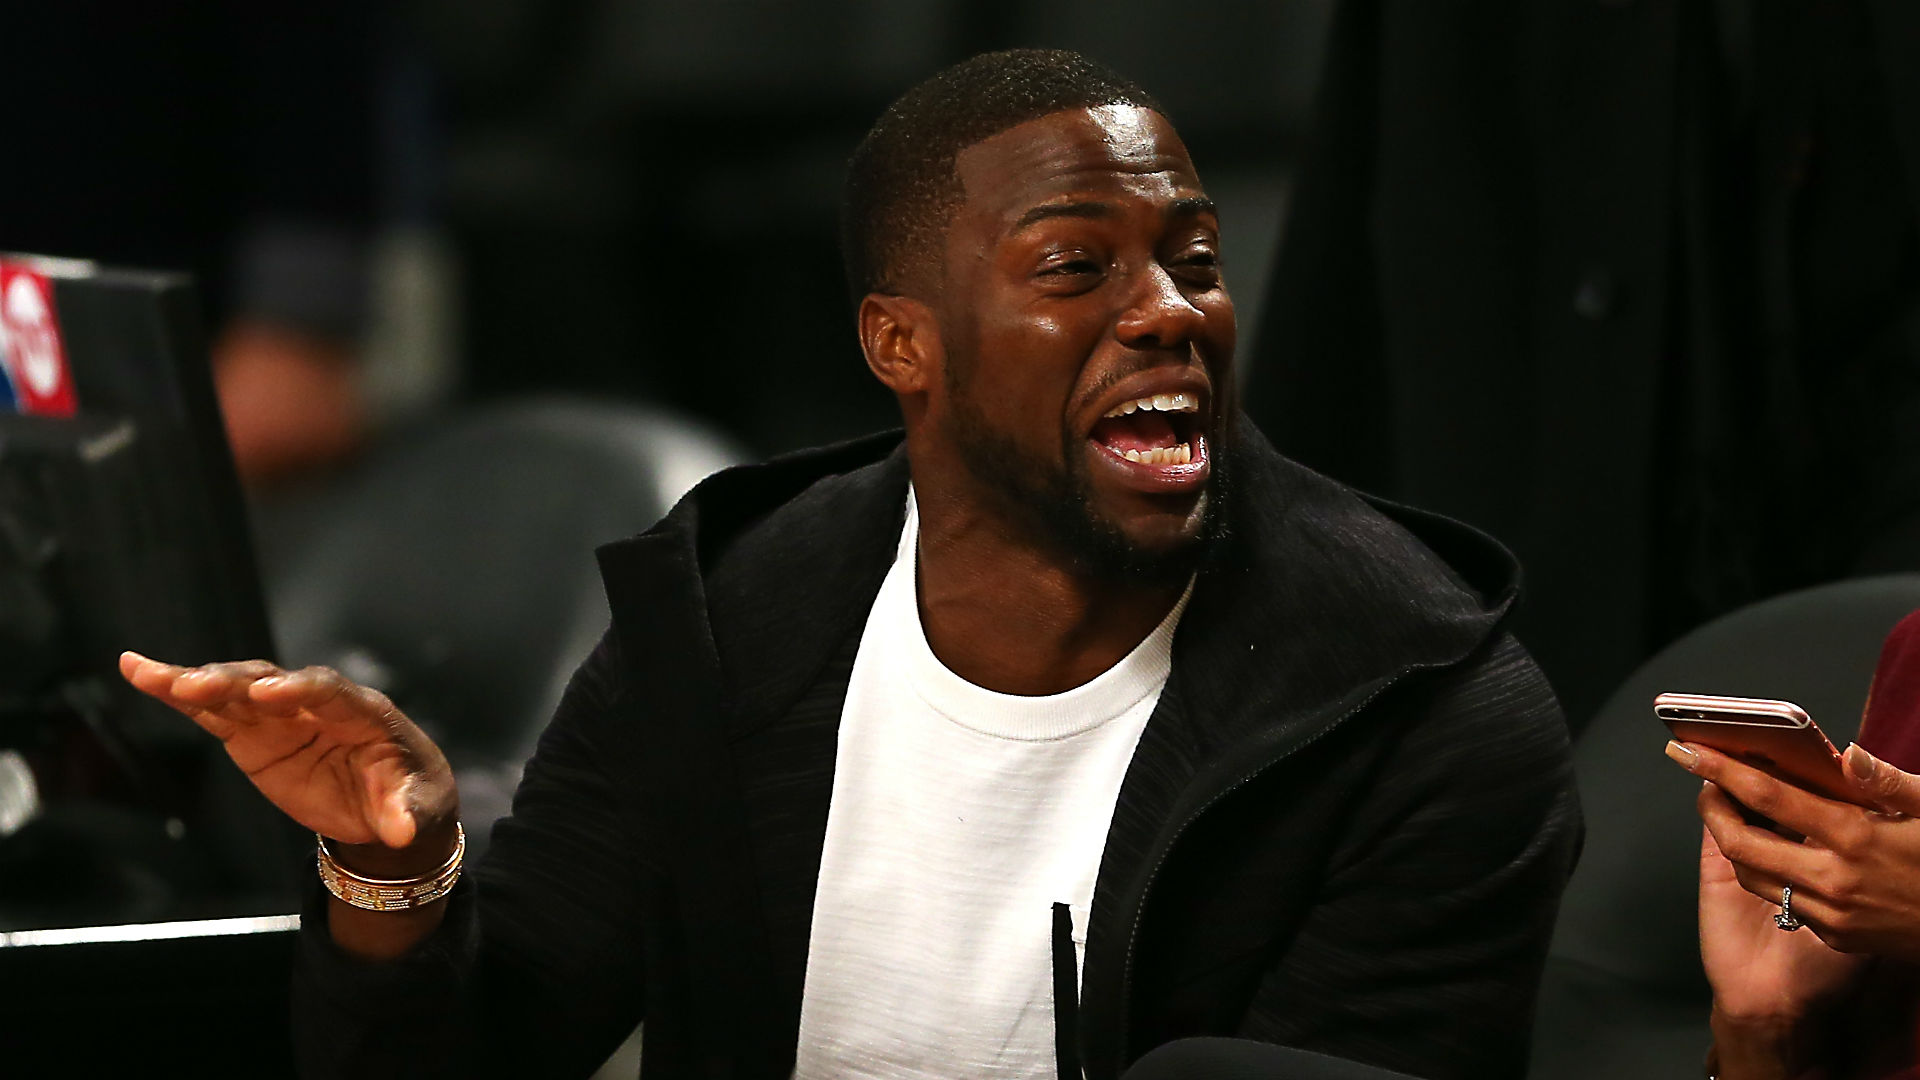 Kevin Hart says Joel Embiid reminds him of … Kevin Hart | NBA | Sporting News1920 x 1080